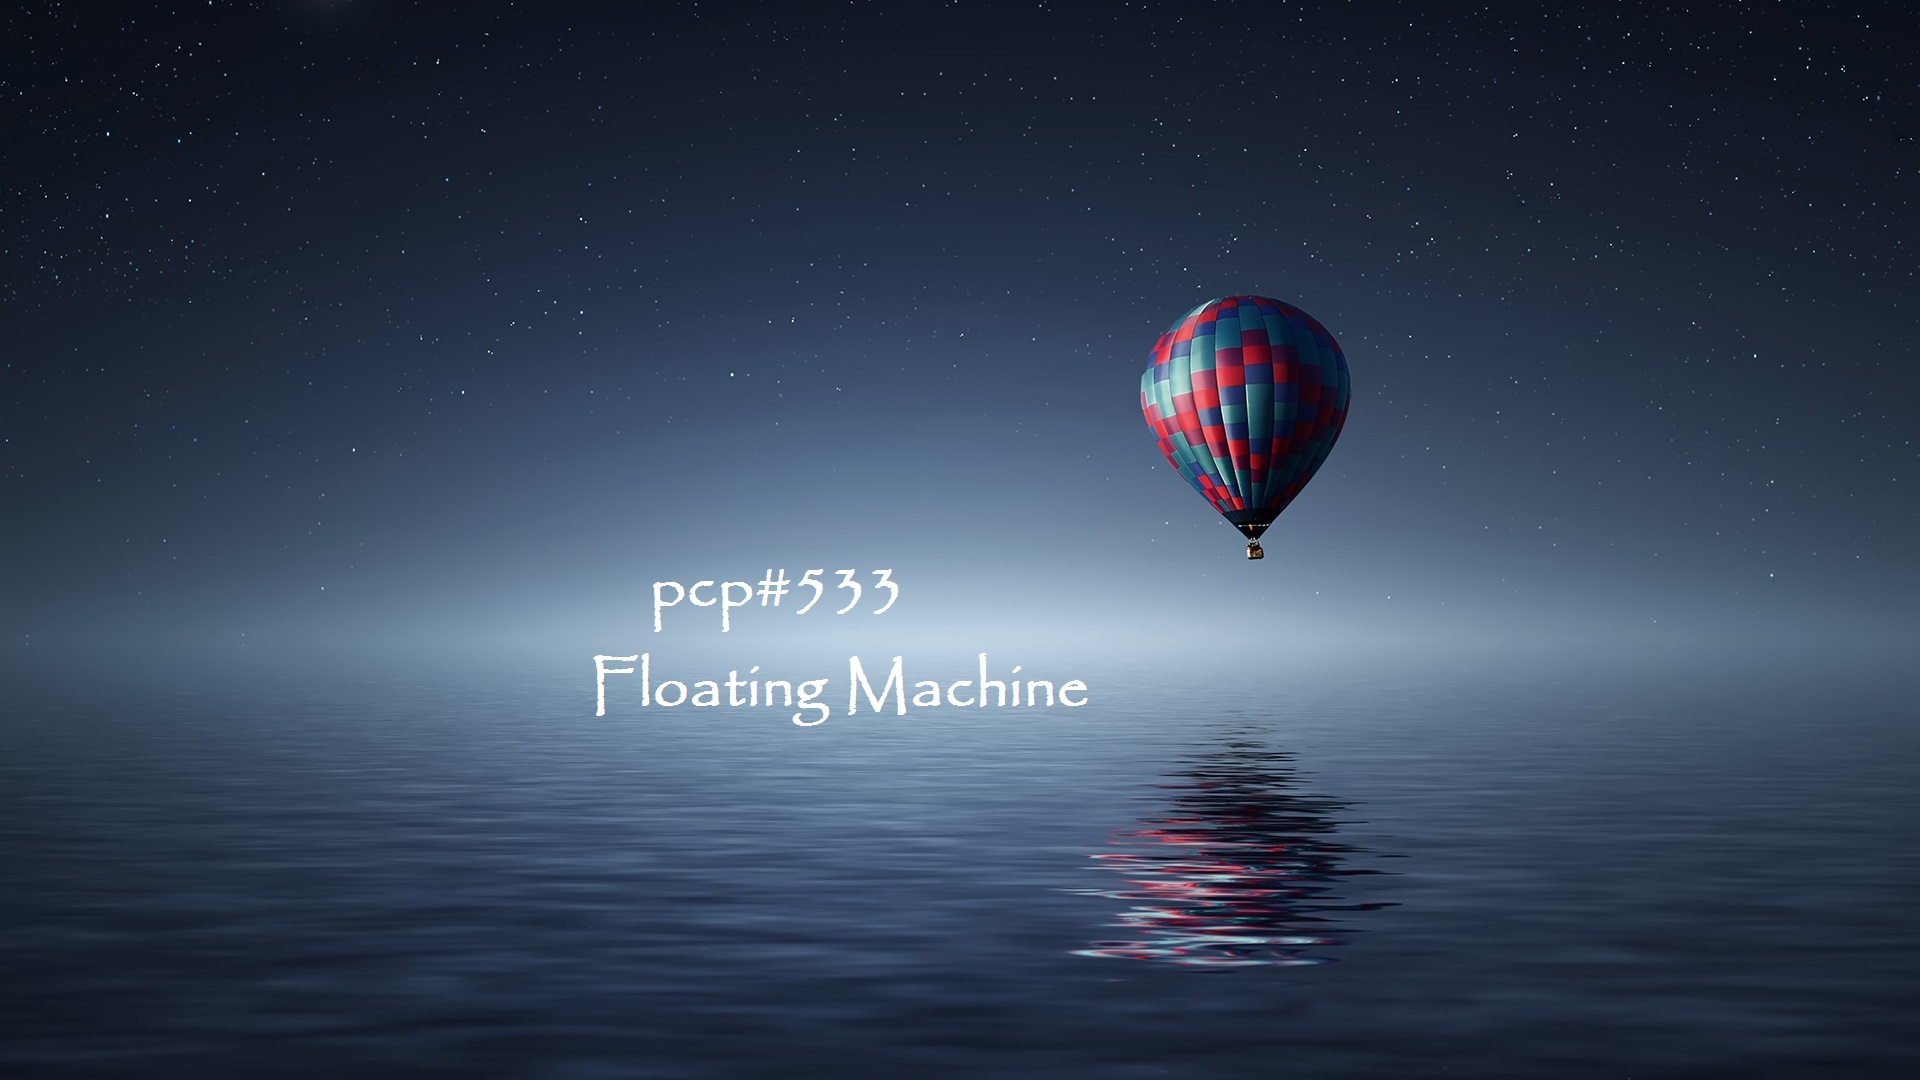 PCP#533... Floating Machine...(Netlabel Day 2017, Part 2)